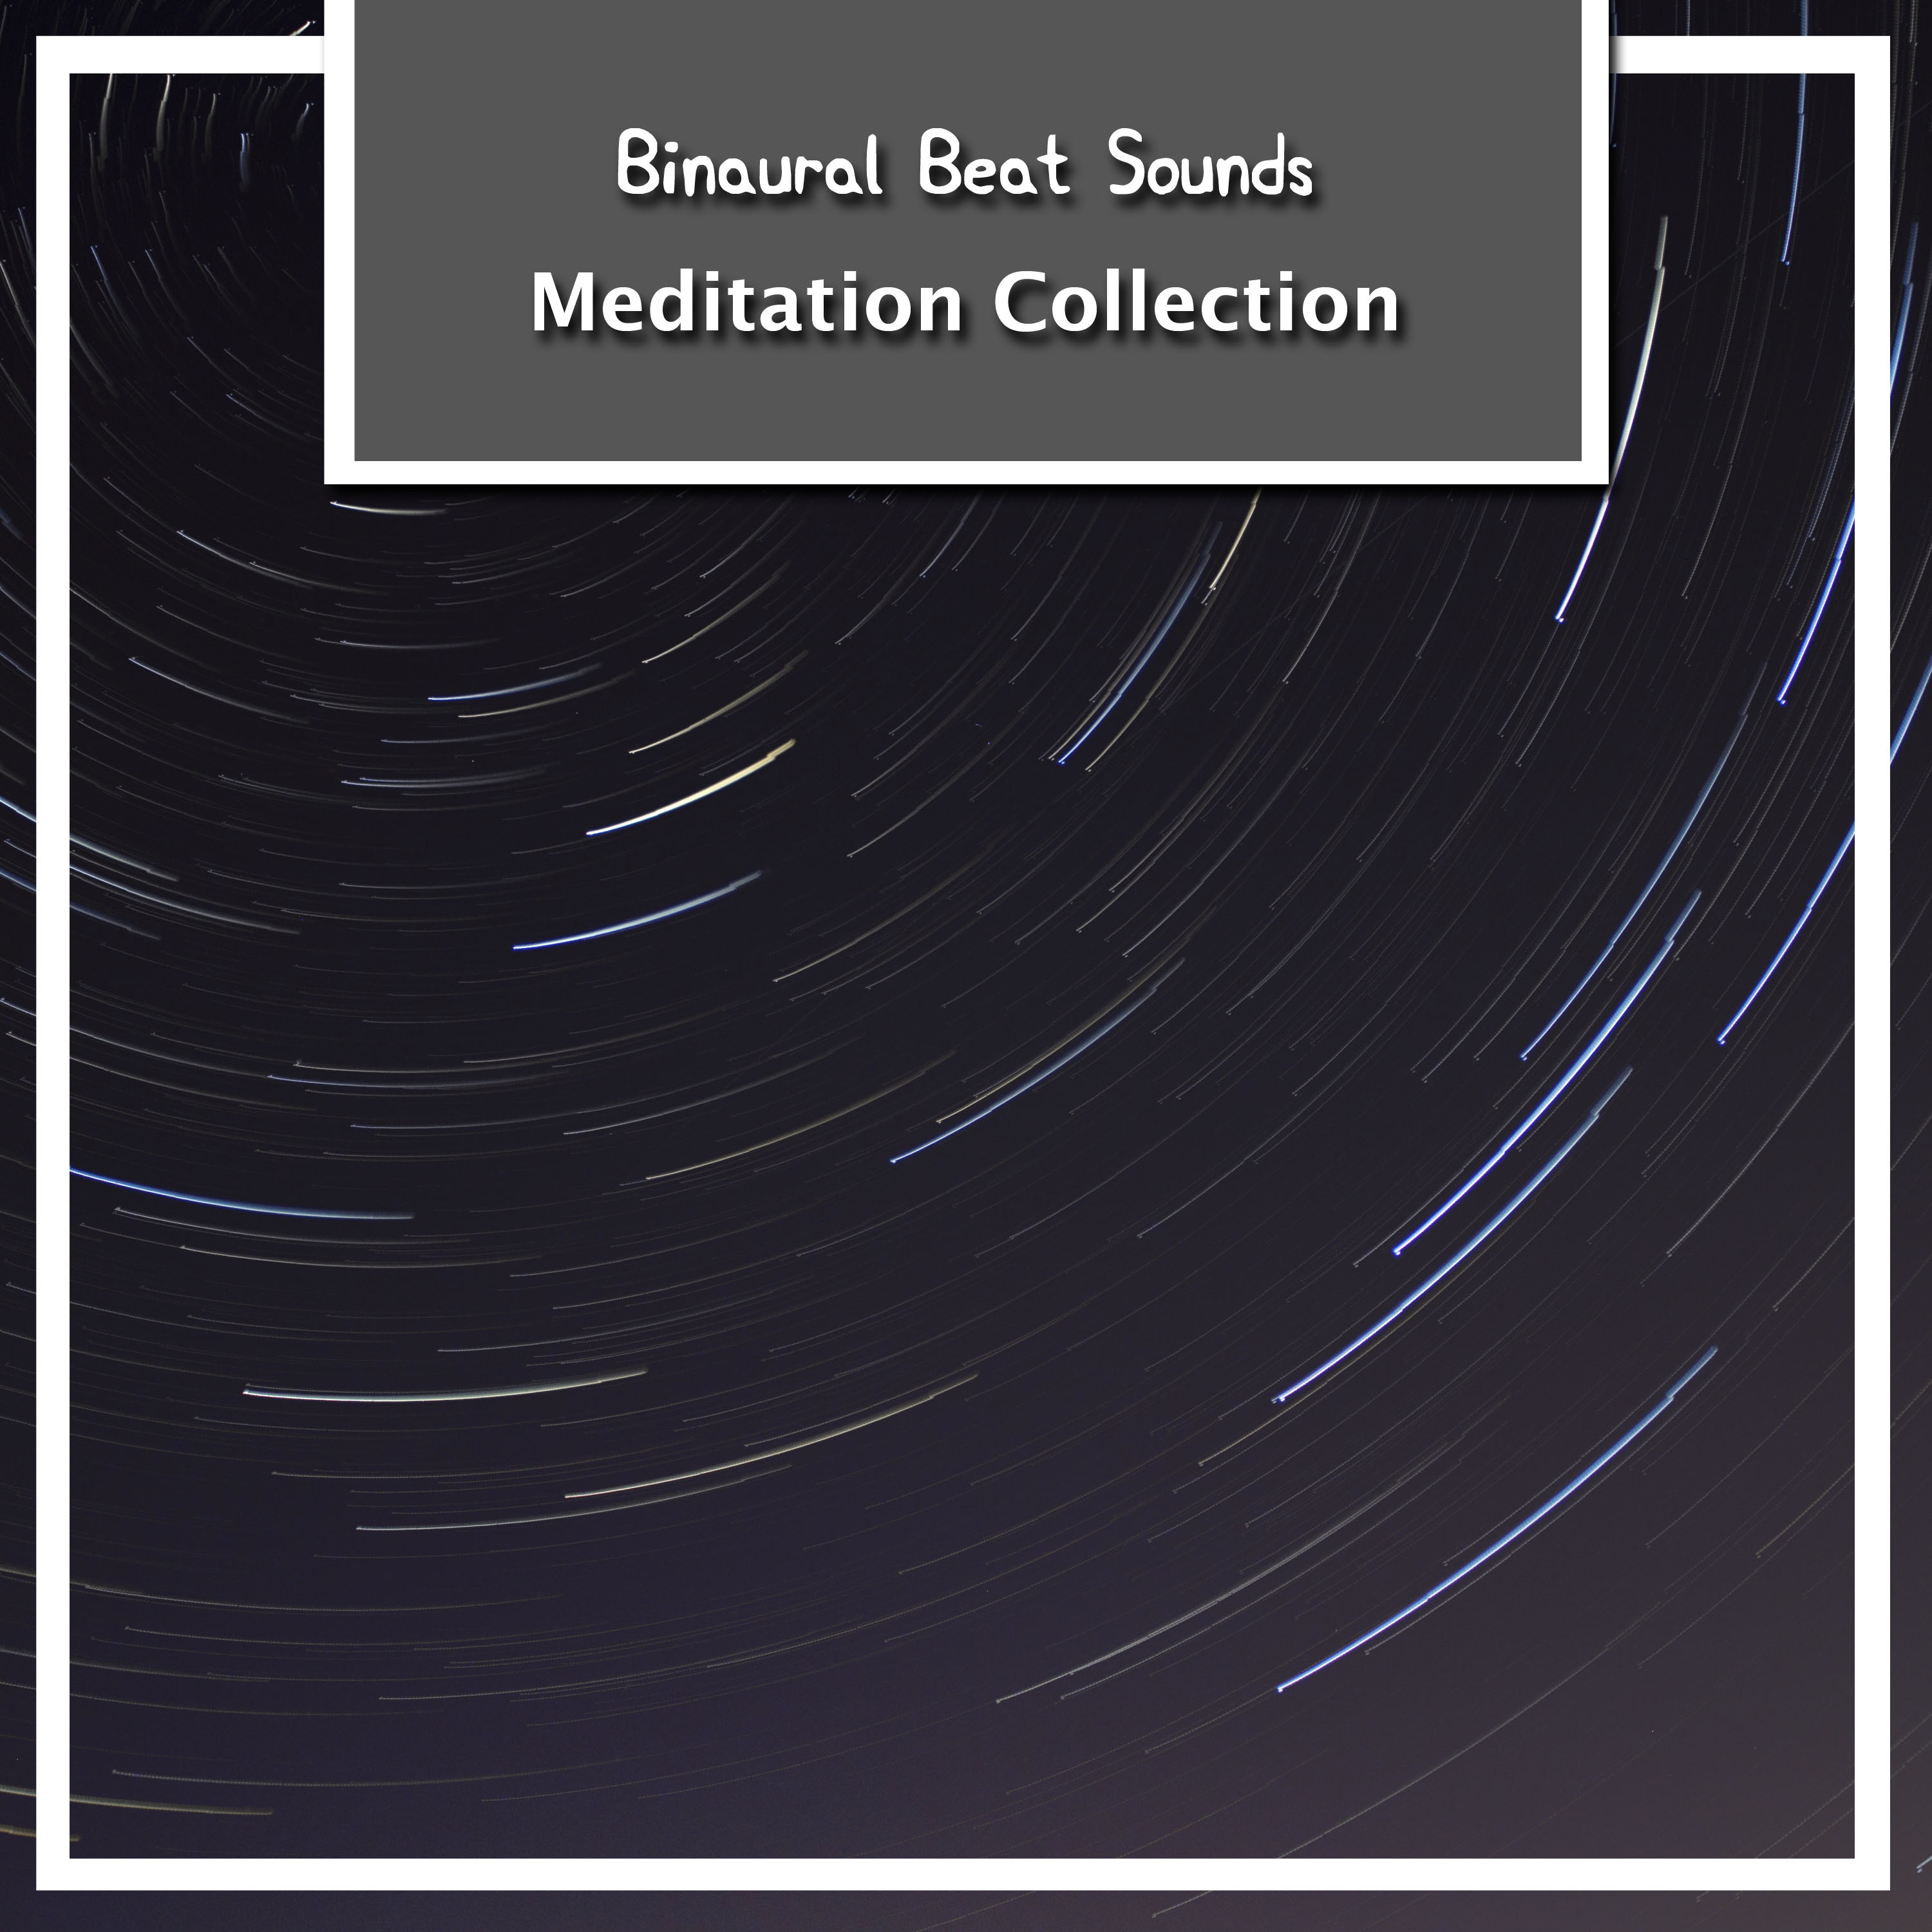 12 Binaural Beat Sounds - Meditaion Collection